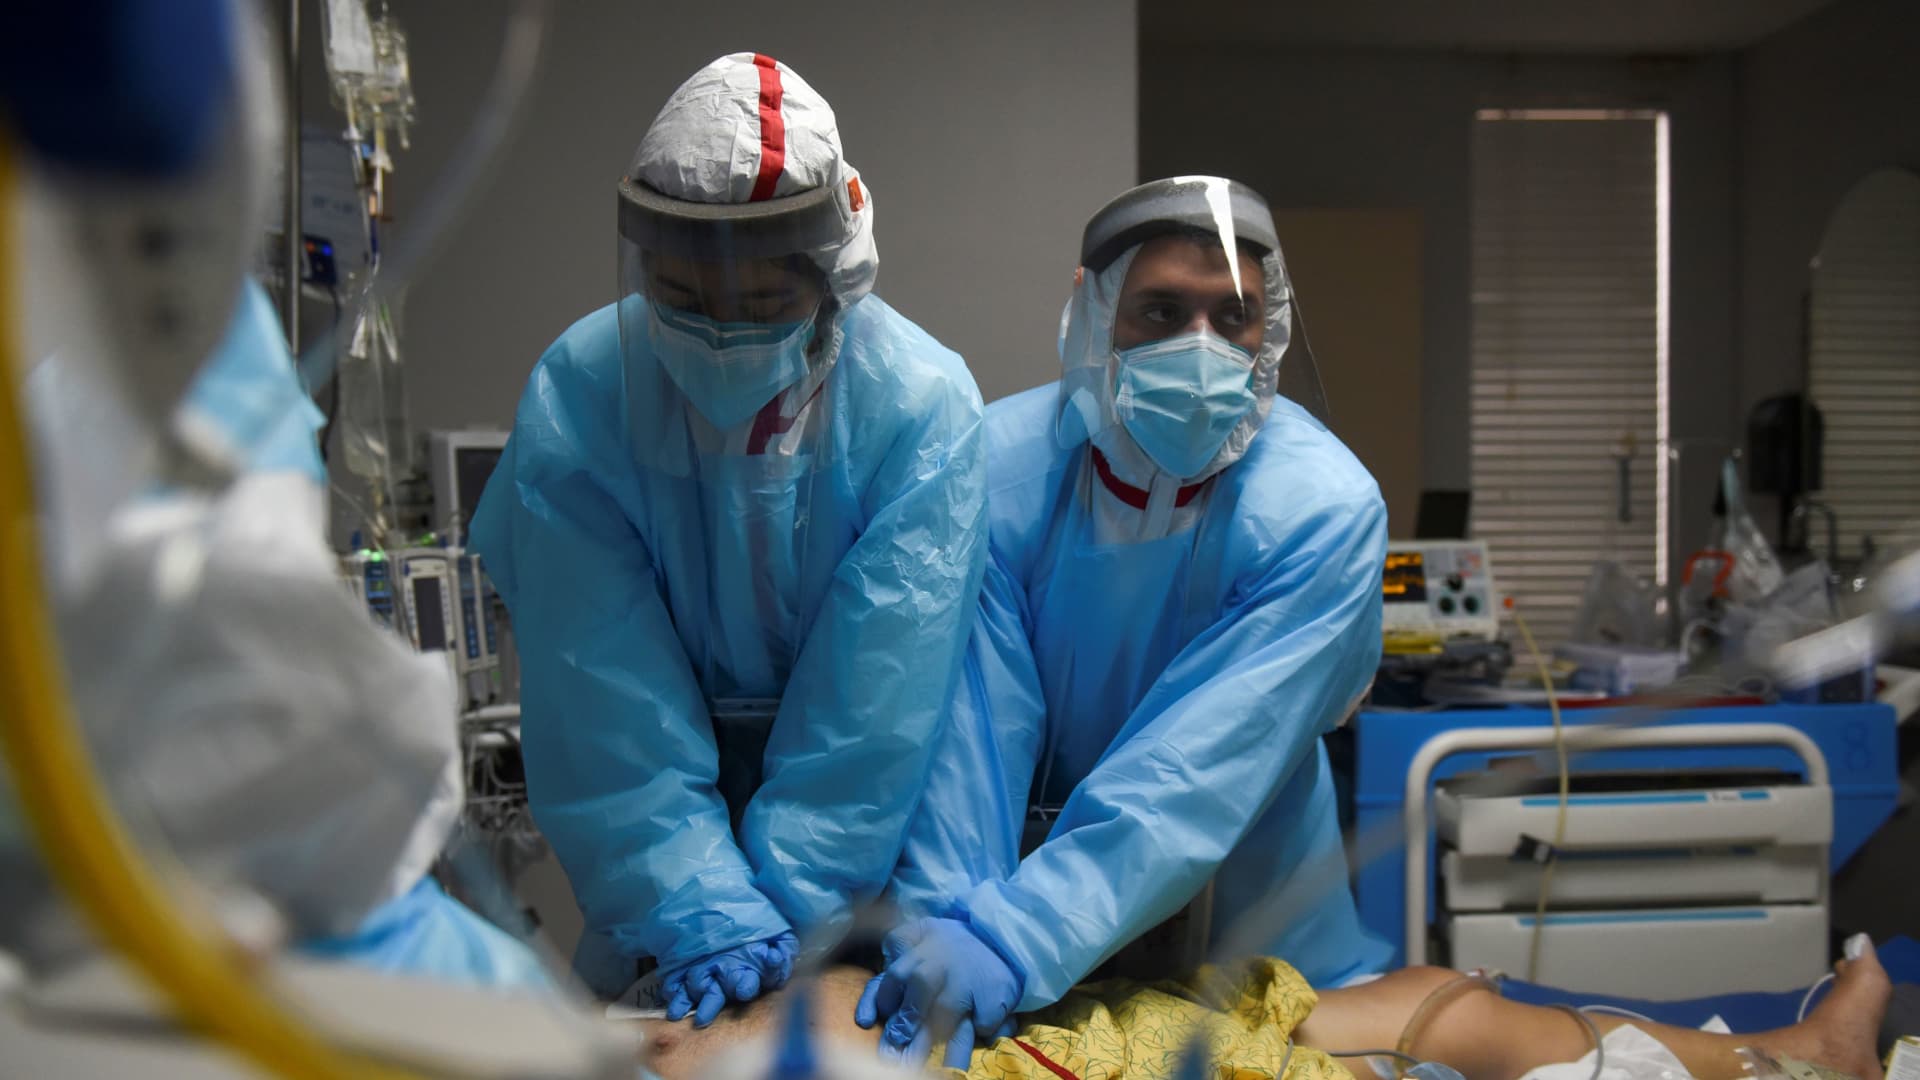 Healthcare personnel perform CPR on a patient inside a coronavirus disease (COVID-19) unit at United Memorial Medical Center as the United States nears 300,000 COVID-19 deaths, in Houston, Texas, U.S., December 12, 2020. Picture taken December 12, 2020.